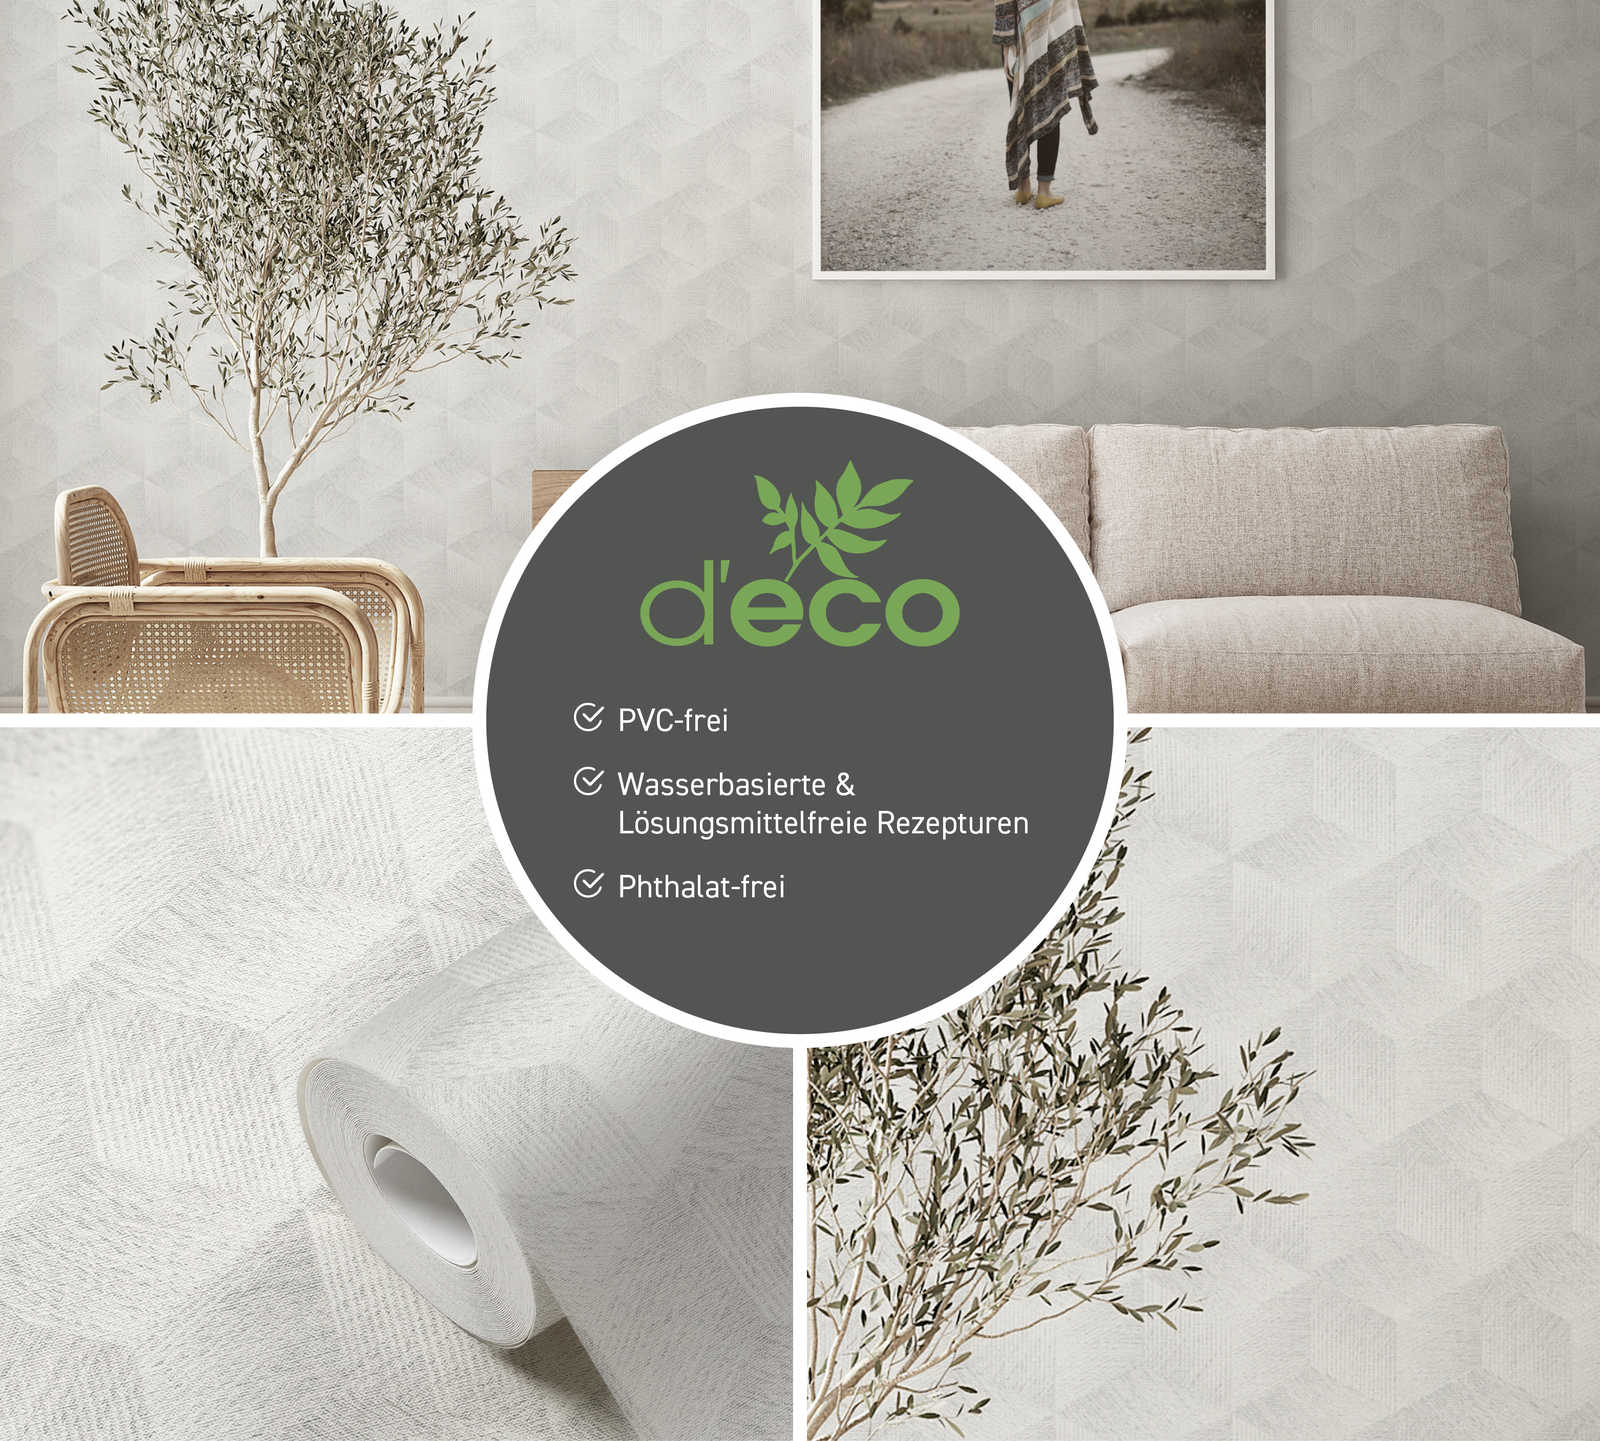             PVC-free 3D optical wallpaper with square pattern & gloss effect - Grey, White
        